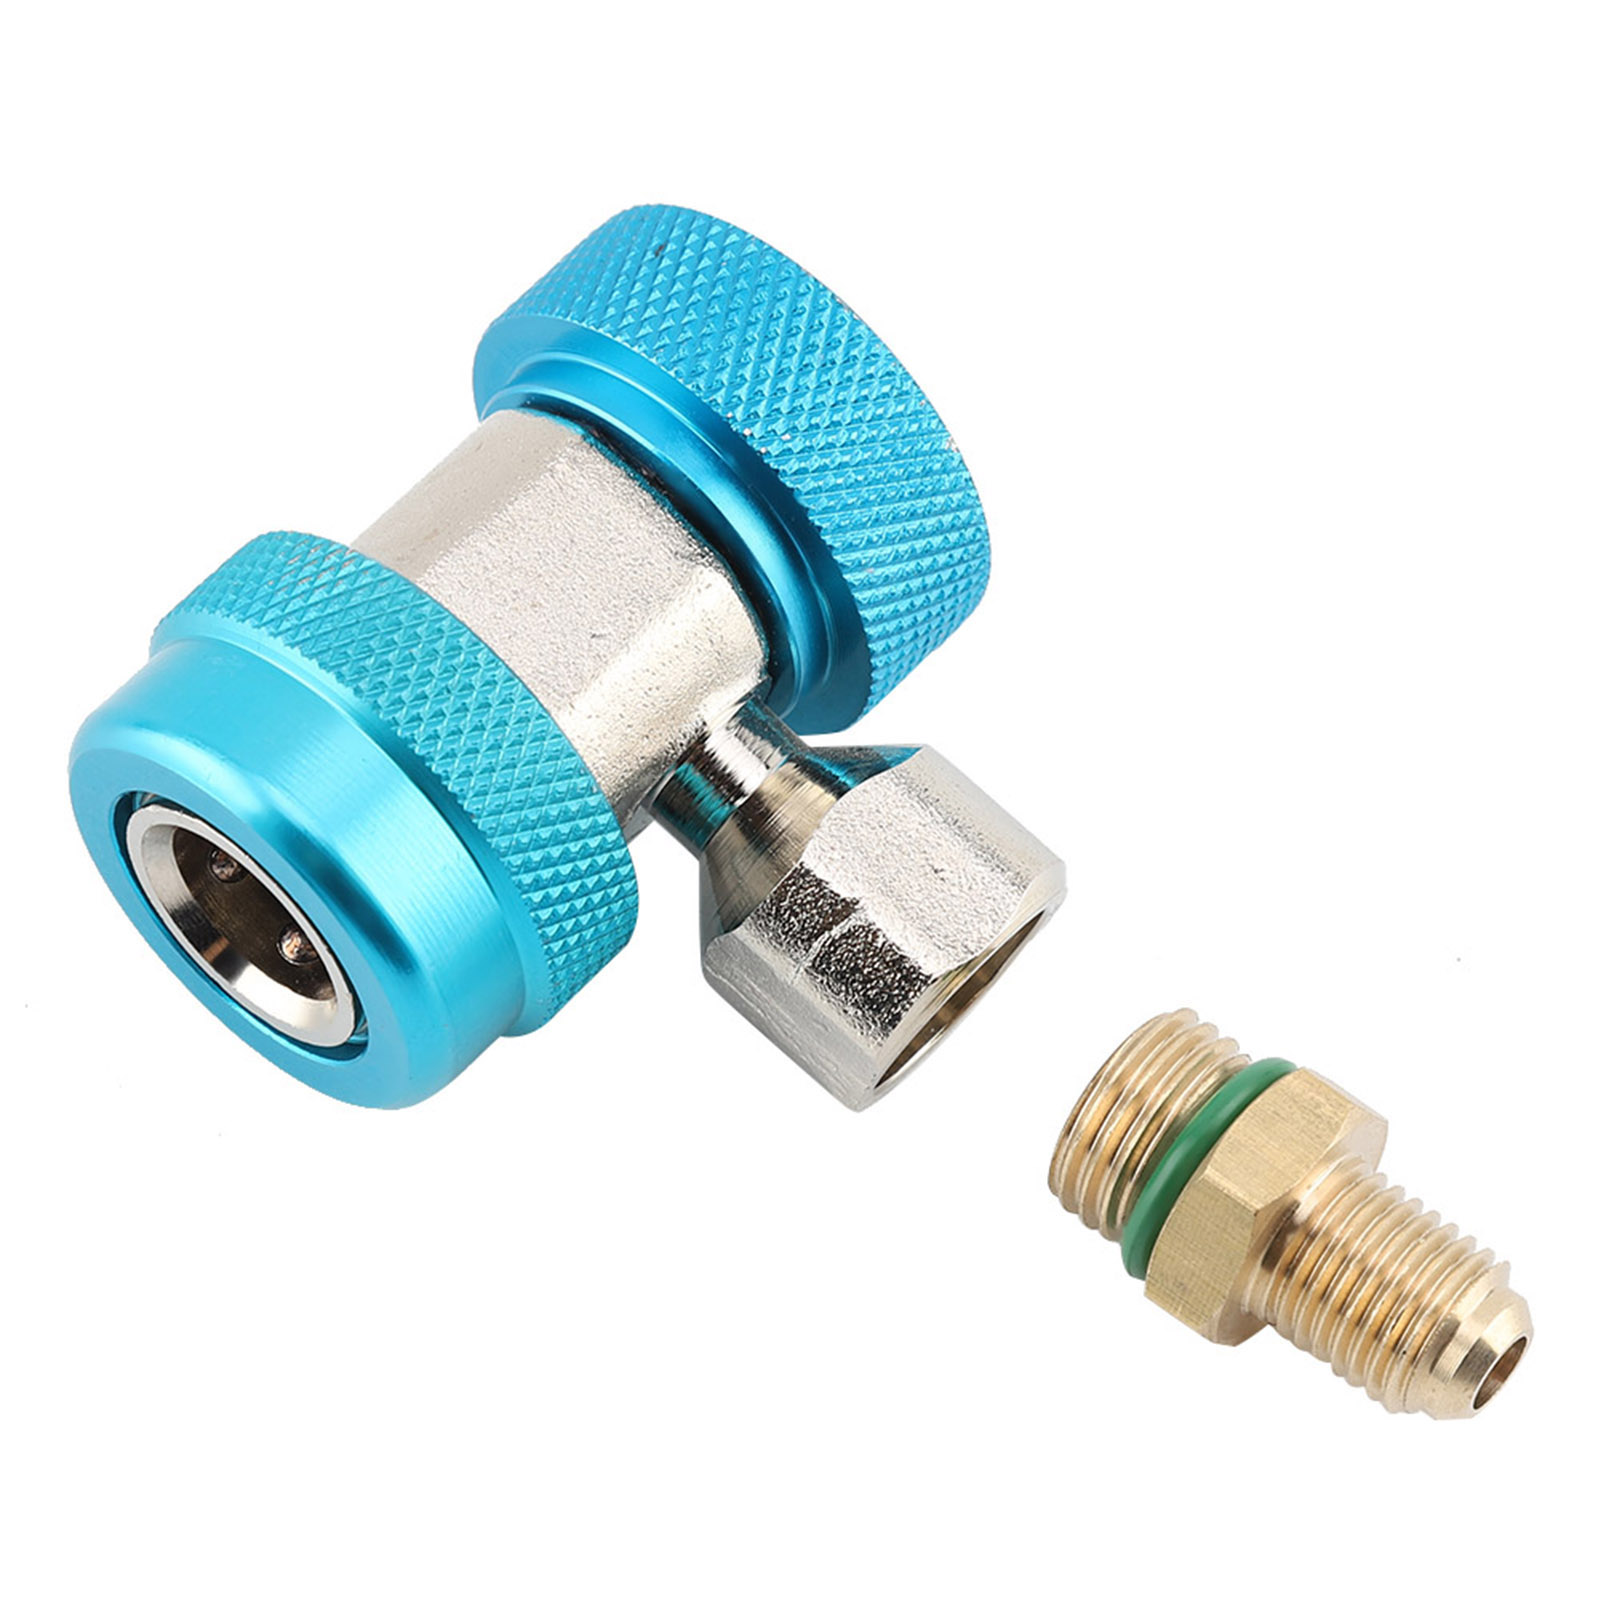 R134 Quick Coupler Adapter, AC Low High Quick Connector Conditioning Extractor Valve Core, AC Hose Fittings[Blue low pressure] - image 4 of 9